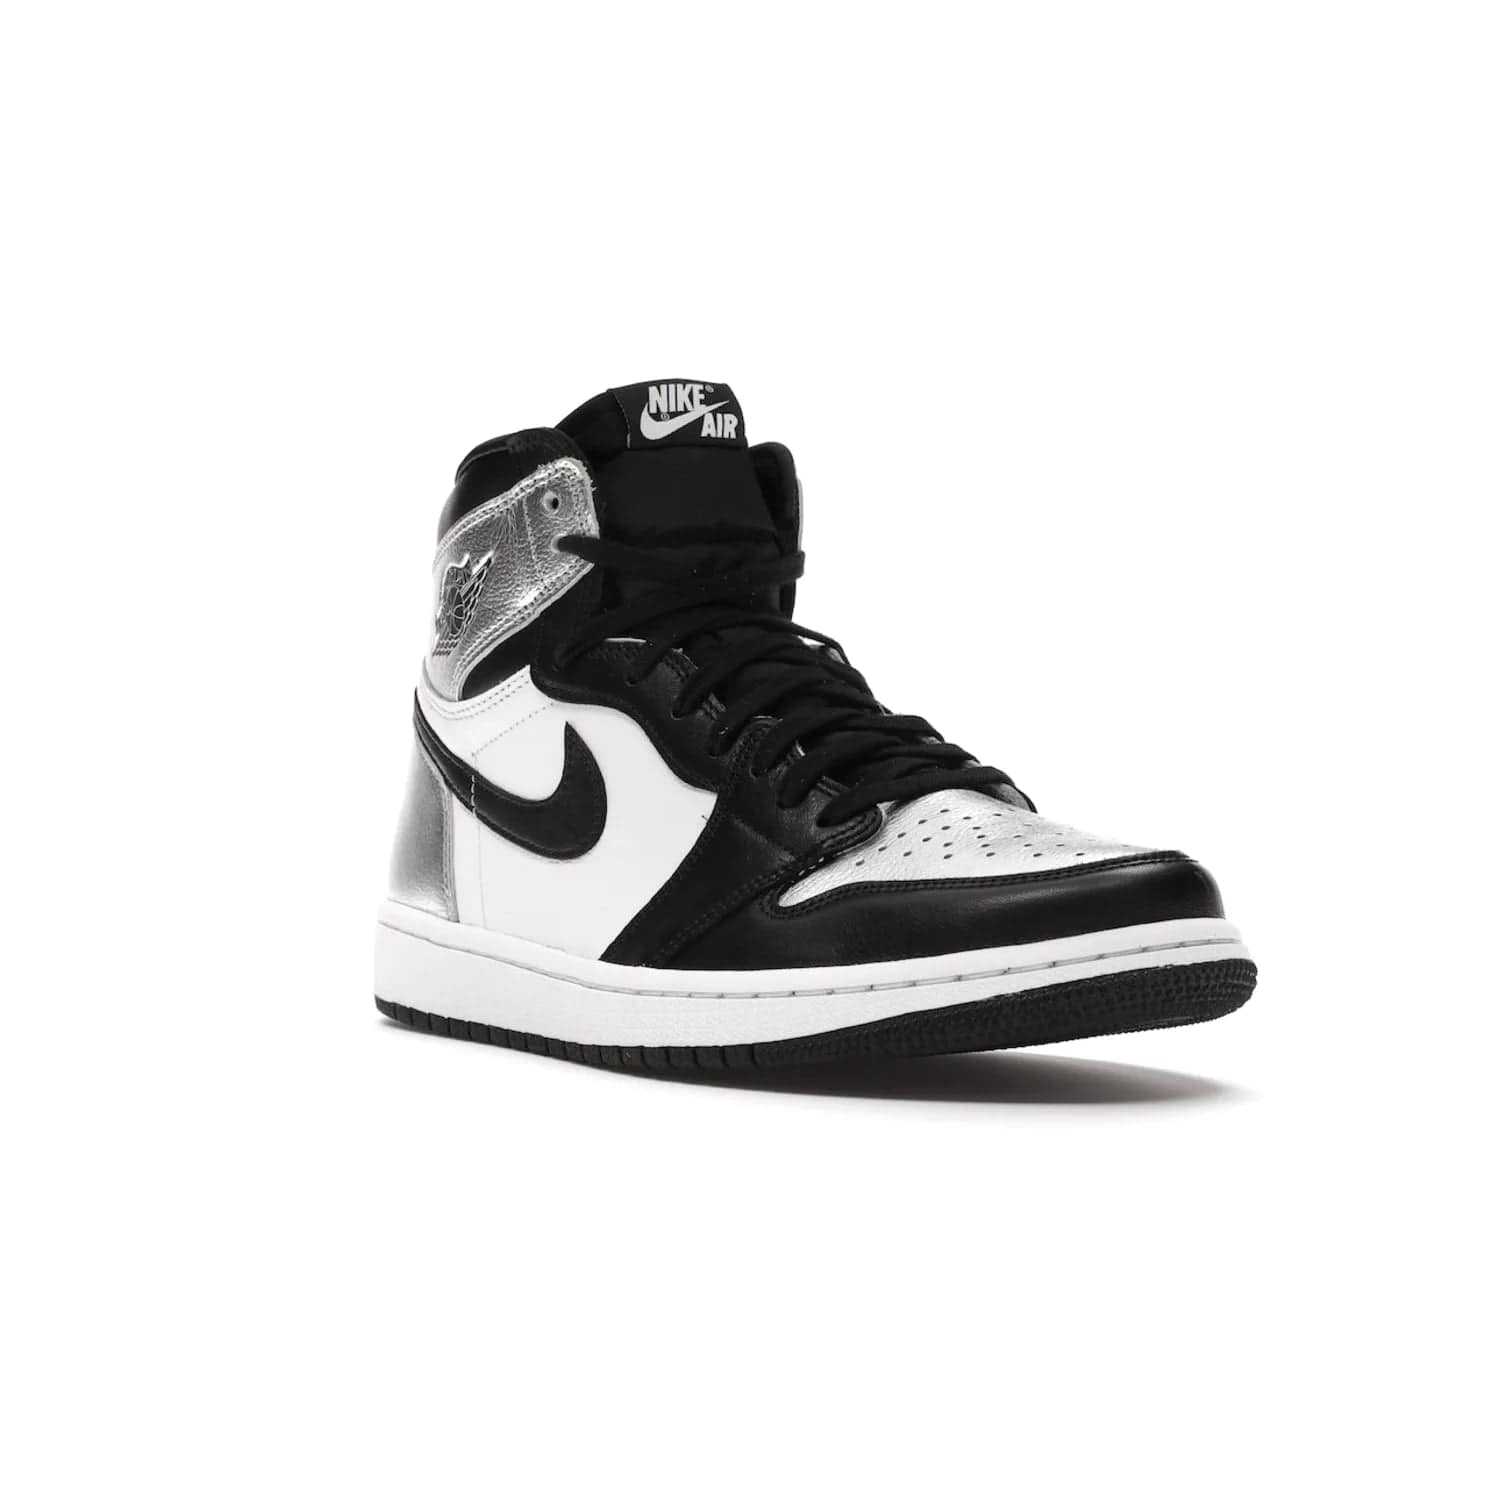 Jordan 1 Retro High Silver Toe (Women's) - Image 6 - Only at www.BallersClubKickz.com - Introducing the Jordan 1 Retro High Silver Toe (Women's): an updated spin on the iconic 'Black Toe' theme. Featuring white & black leather and silver patent leather construction. Nike Air branding, Air Jordan Wings logo, and white/black sole finish give a classic look. The perfect addition to an on-trend streetwear look. Available in classic black & white, this Jordan 1 is an instant classic. Released in February 202